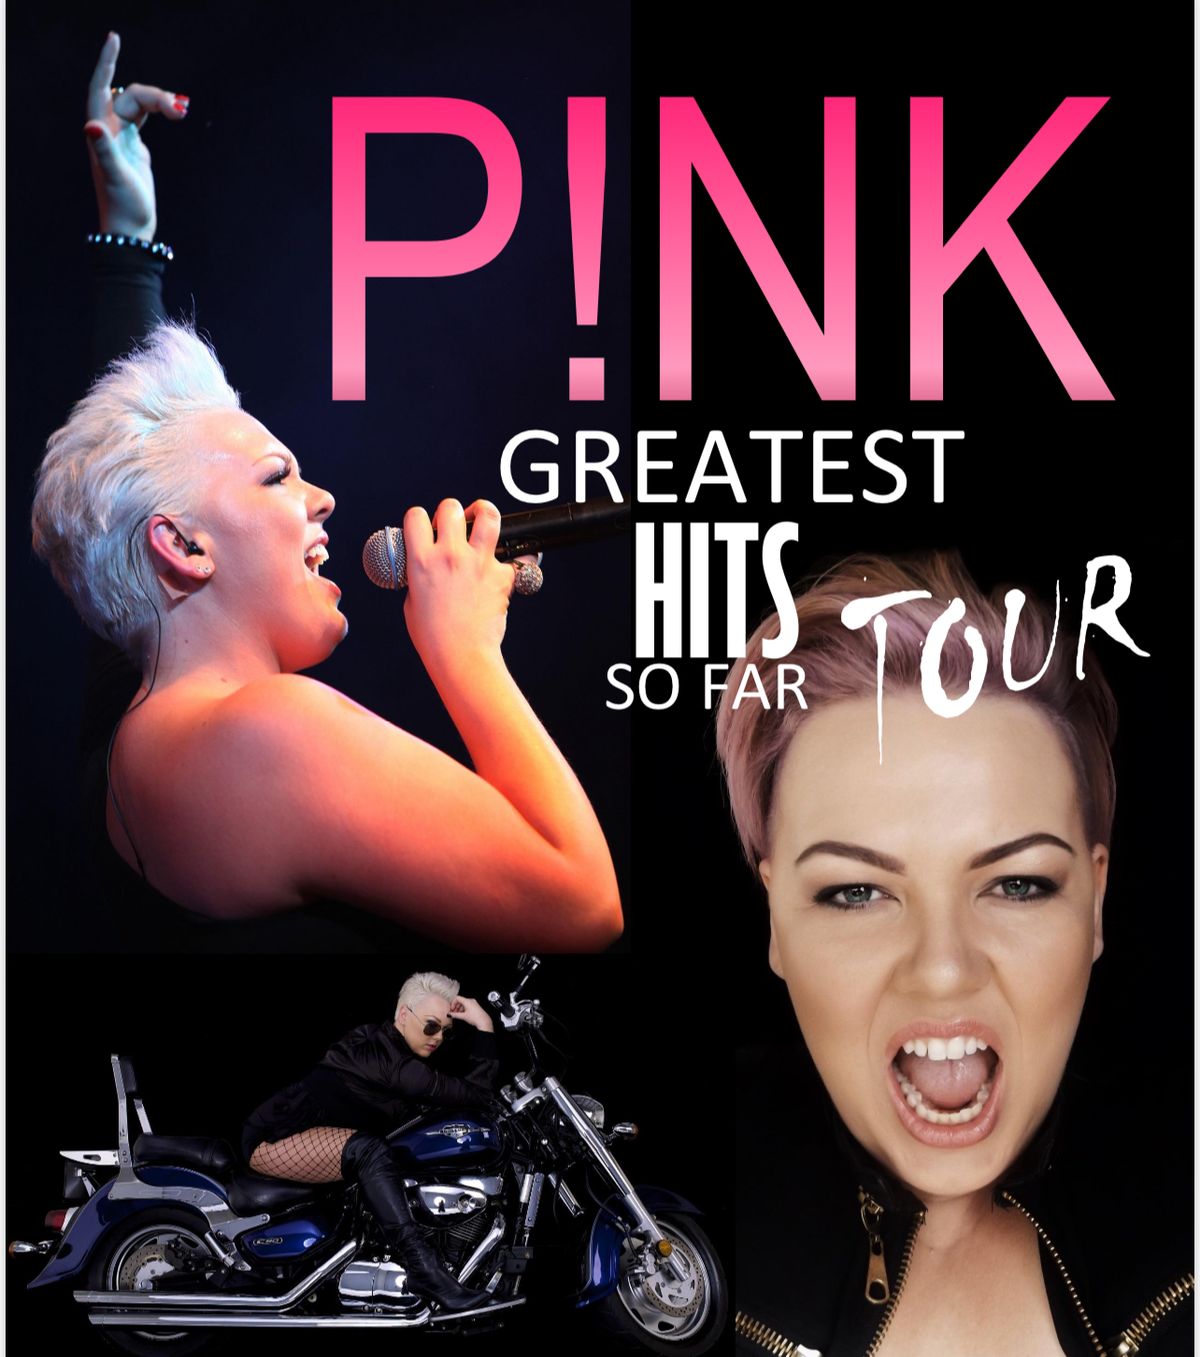 Pink Lets get the party started show